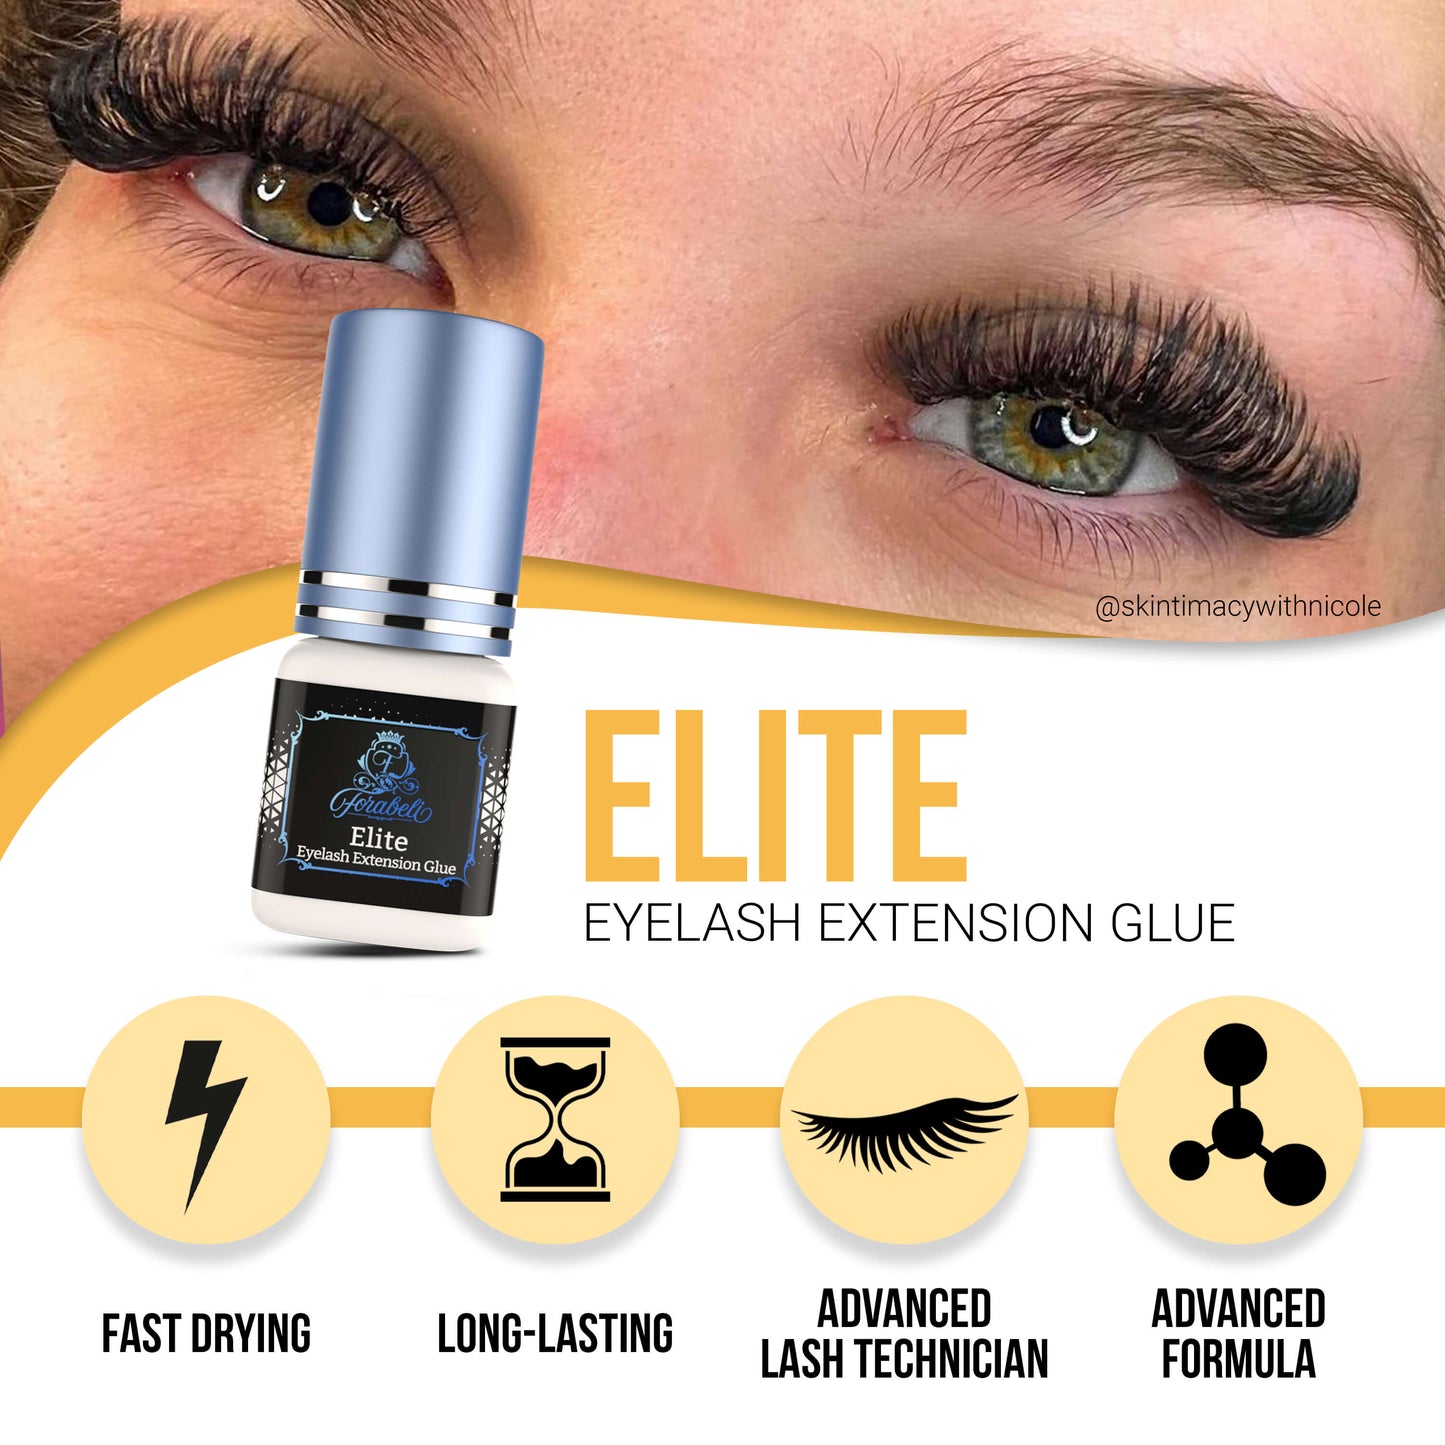 Eyelash extension glue with fast-drying feature, long-lasting hold, designed for advanced lash technicians, and formulated with an advanced adhesive formula.